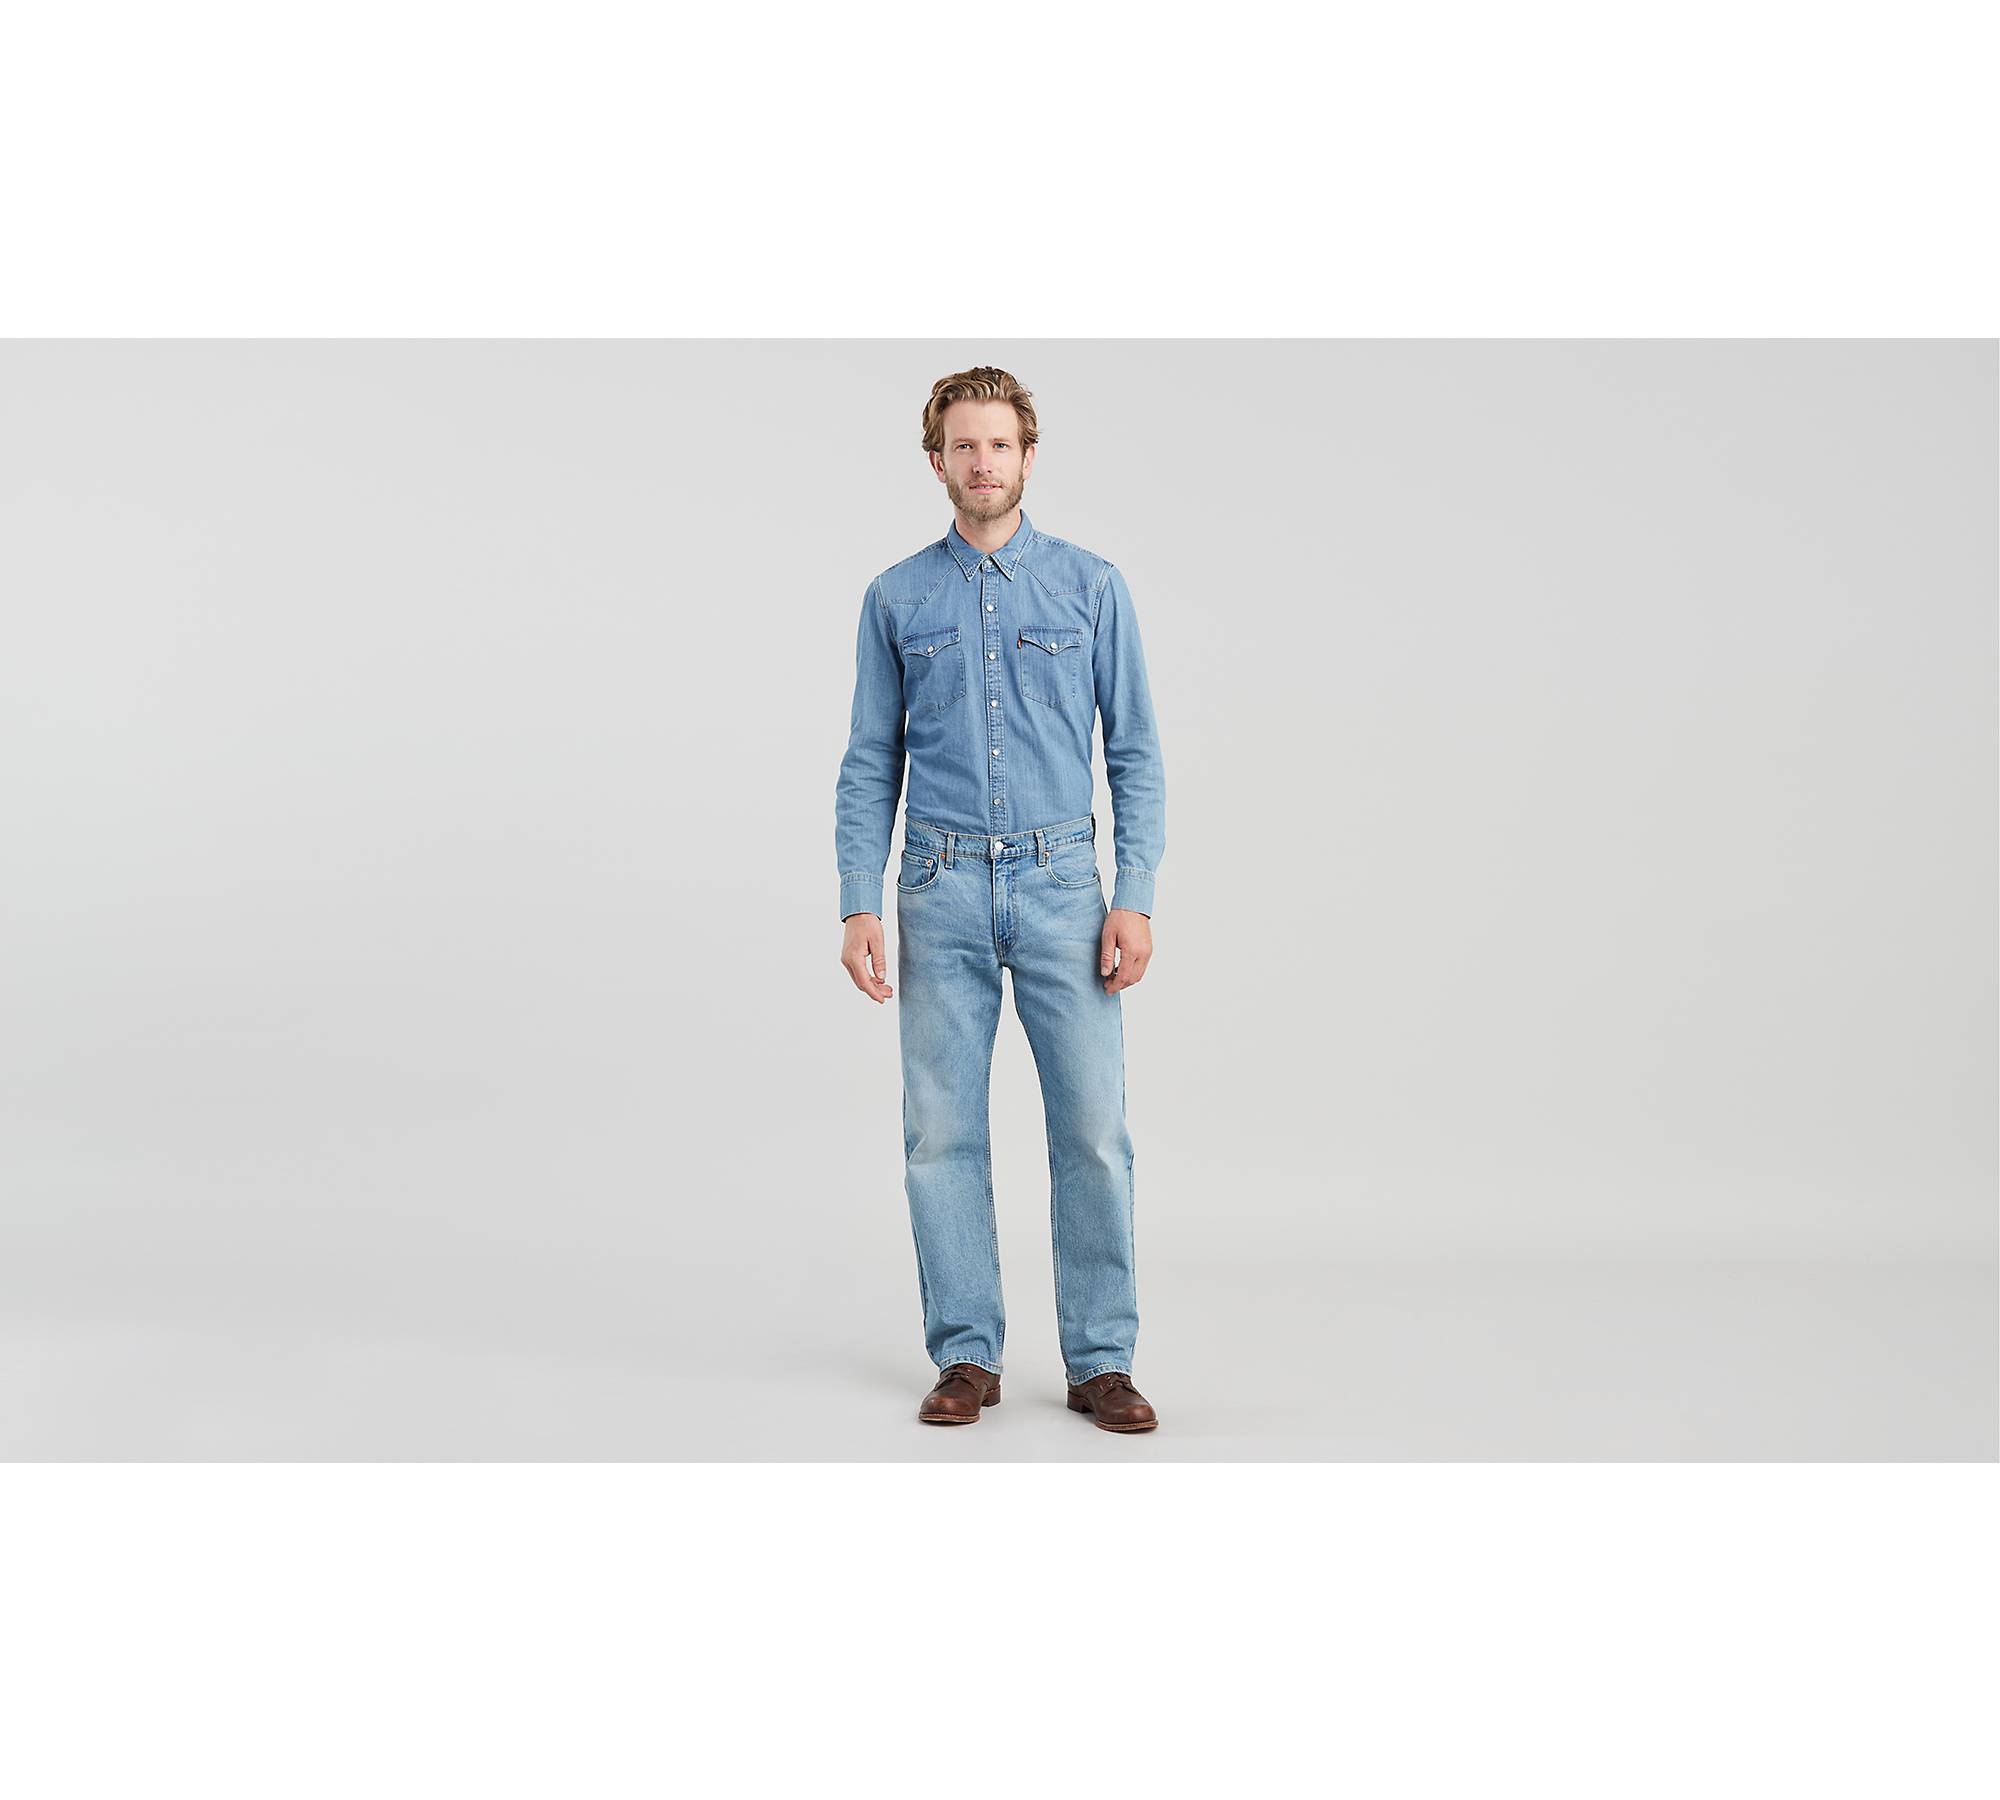 569™ Loose Straight Fit Men's Jeans - Light Wash